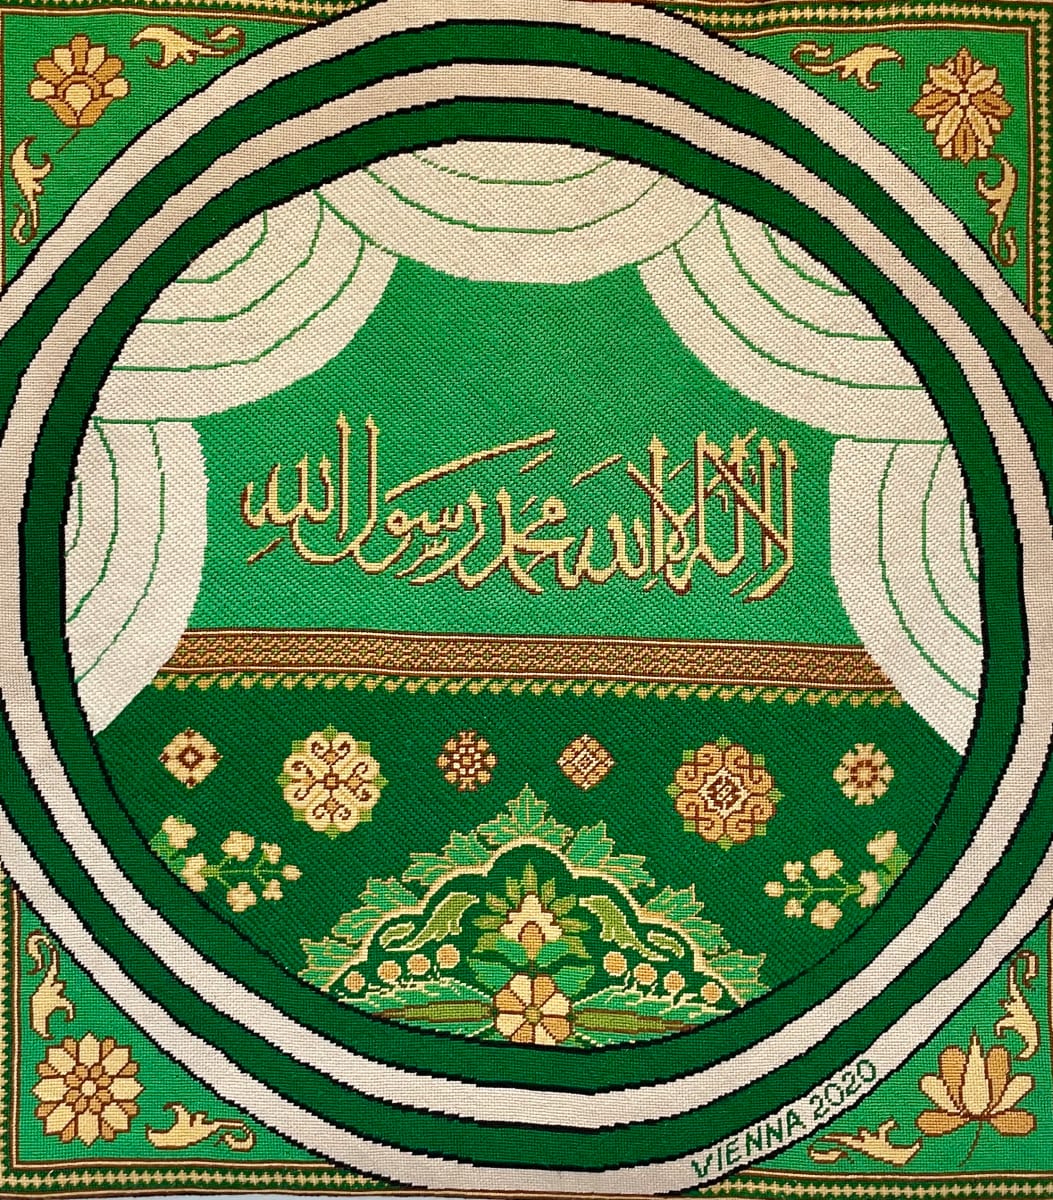 The Islamic Banner with Inscription by Vienna Cobb-Anderson 